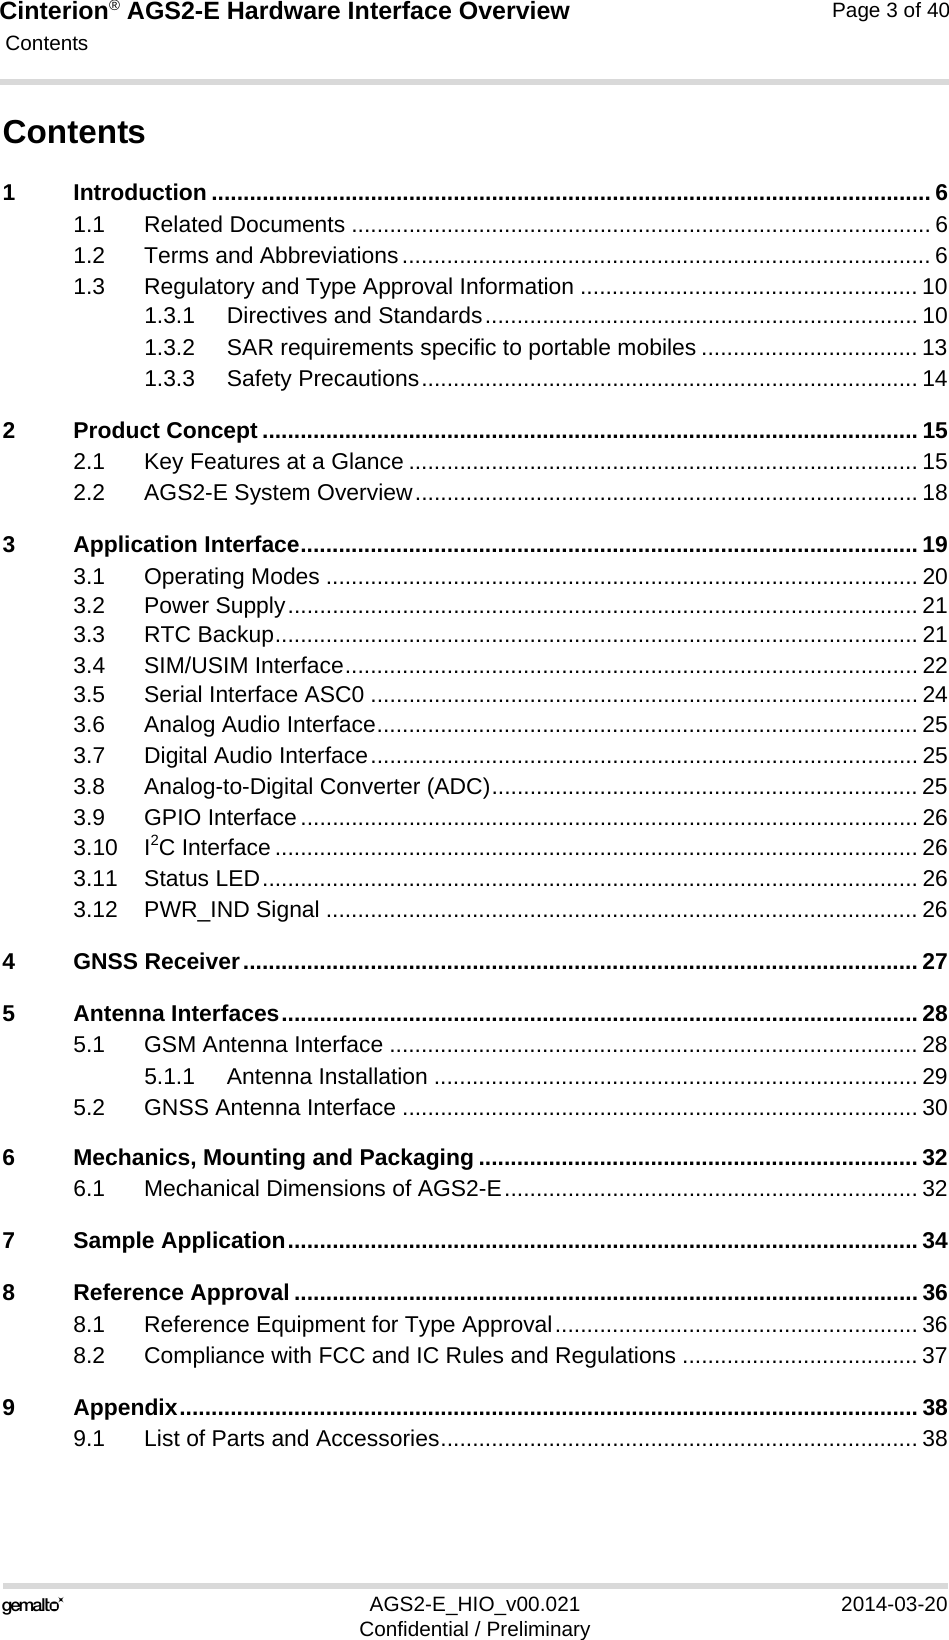 Cinterion® AGS2-E Hardware Interface Overview Contents40AGS2-E_HIO_v00.021 2014-03-20Confidential / PreliminaryPage 3 of 40Contents1 Introduction ................................................................................................................. 61.1 Related Documents ........................................................................................... 61.2 Terms and Abbreviations................................................................................... 61.3 Regulatory and Type Approval Information ..................................................... 101.3.1 Directives and Standards.................................................................... 101.3.2 SAR requirements specific to portable mobiles .................................. 131.3.3 Safety Precautions.............................................................................. 142 Product Concept ....................................................................................................... 152.1 Key Features at a Glance ................................................................................ 152.2 AGS2-E System Overview............................................................................... 183 Application Interface................................................................................................. 193.1 Operating Modes ............................................................................................. 203.2 Power Supply................................................................................................... 213.3 RTC Backup..................................................................................................... 213.4 SIM/USIM Interface.......................................................................................... 223.5 Serial Interface ASC0 ...................................................................................... 243.6 Analog Audio Interface..................................................................................... 253.7 Digital Audio Interface...................................................................................... 253.8 Analog-to-Digital Converter (ADC)................................................................... 253.9 GPIO Interface................................................................................................. 263.10 I2C Interface ..................................................................................................... 263.11 Status LED....................................................................................................... 263.12 PWR_IND Signal ............................................................................................. 264 GNSS Receiver.......................................................................................................... 275 Antenna Interfaces.................................................................................................... 285.1 GSM Antenna Interface ................................................................................... 285.1.1 Antenna Installation ............................................................................ 295.2 GNSS Antenna Interface ................................................................................. 306 Mechanics, Mounting and Packaging ..................................................................... 326.1 Mechanical Dimensions of AGS2-E................................................................. 327 Sample Application................................................................................................... 348 Reference Approval .................................................................................................. 368.1 Reference Equipment for Type Approval......................................................... 368.2 Compliance with FCC and IC Rules and Regulations ..................................... 379 Appendix.................................................................................................................... 389.1 List of Parts and Accessories........................................................................... 38